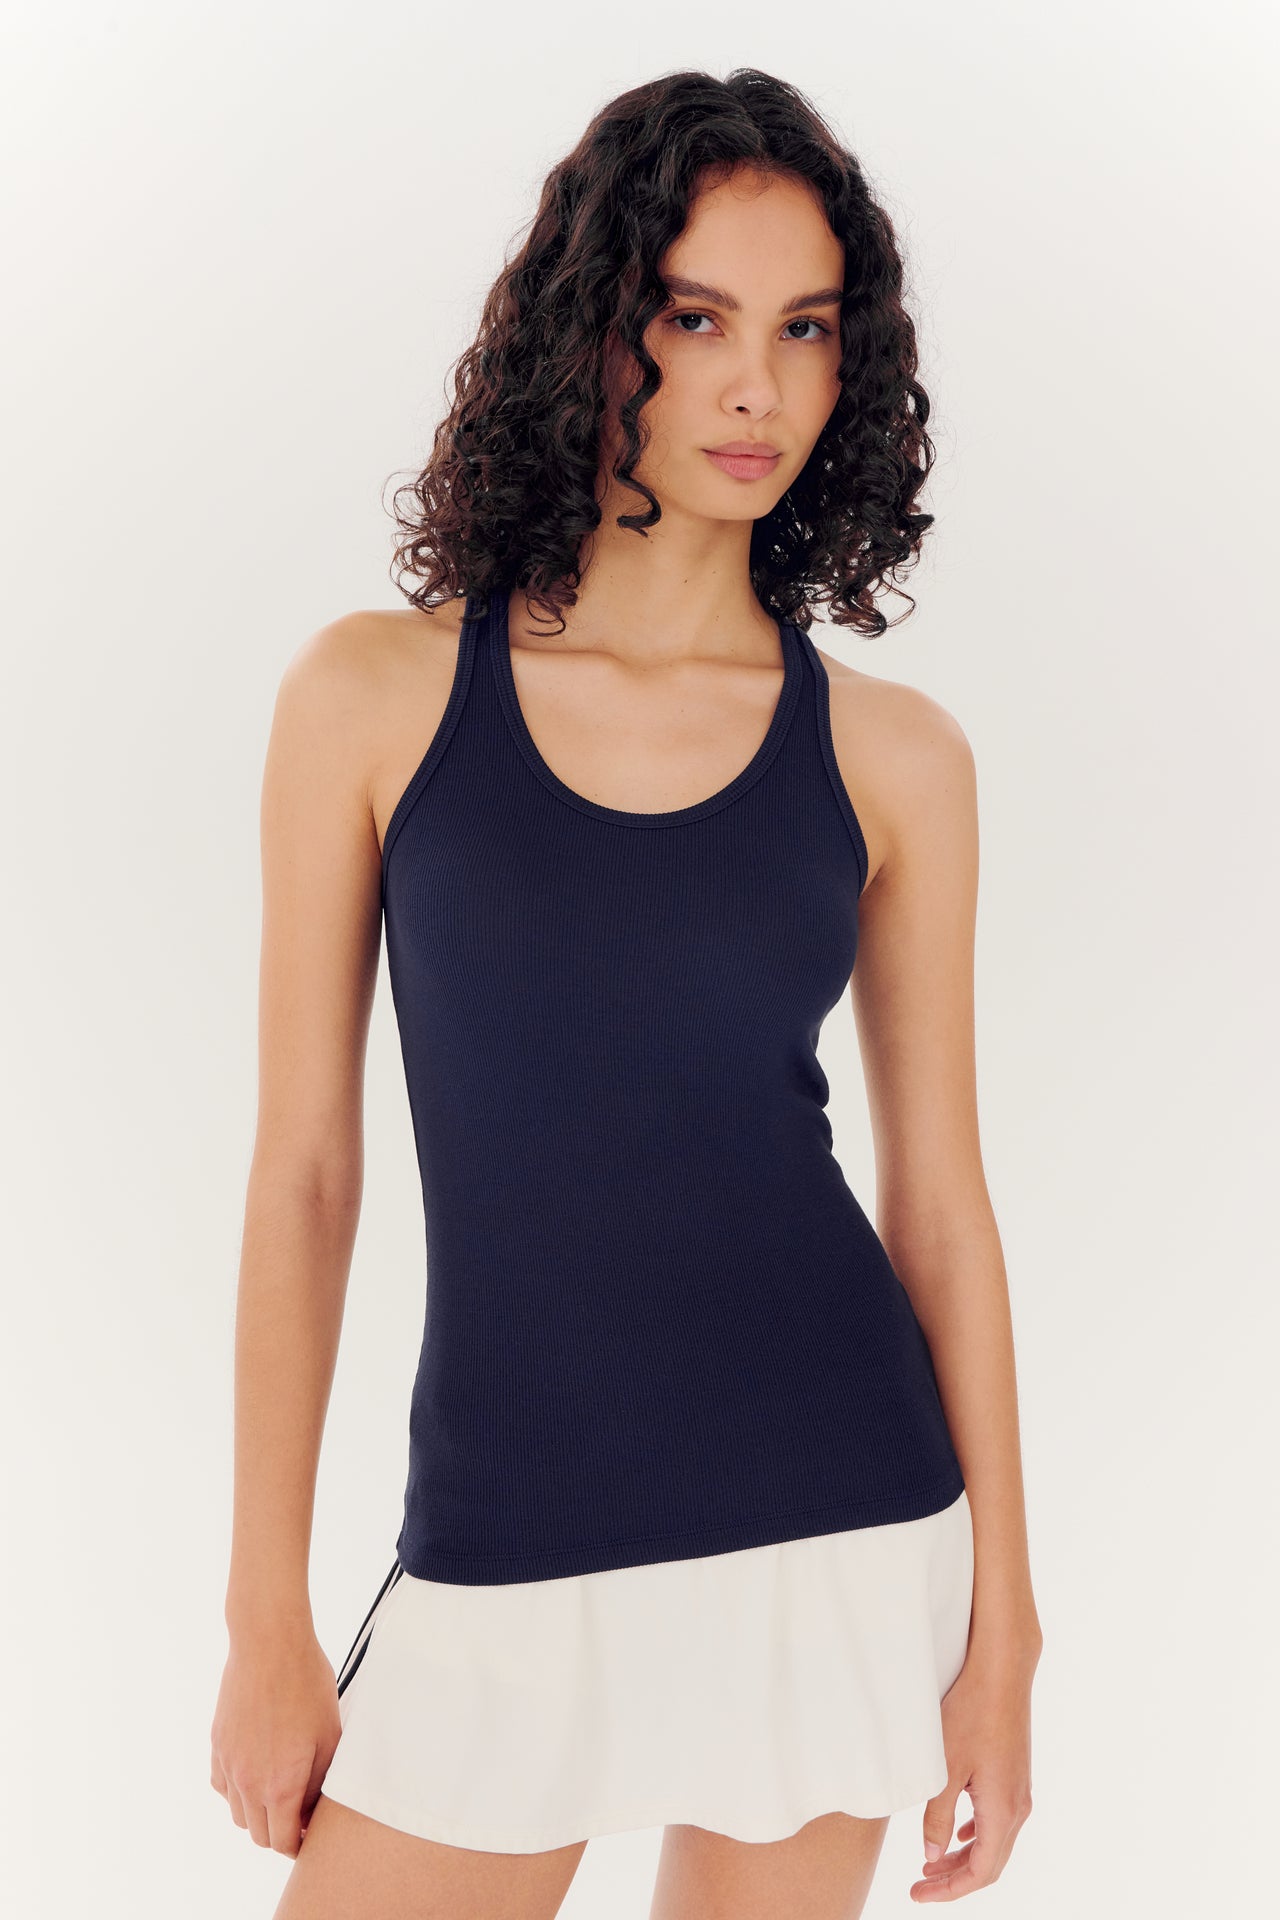 A woman with curly hair wearing a SPLITS59 Ashby Rib Tank in Indigo and a white skirt, standing against a plain white background.